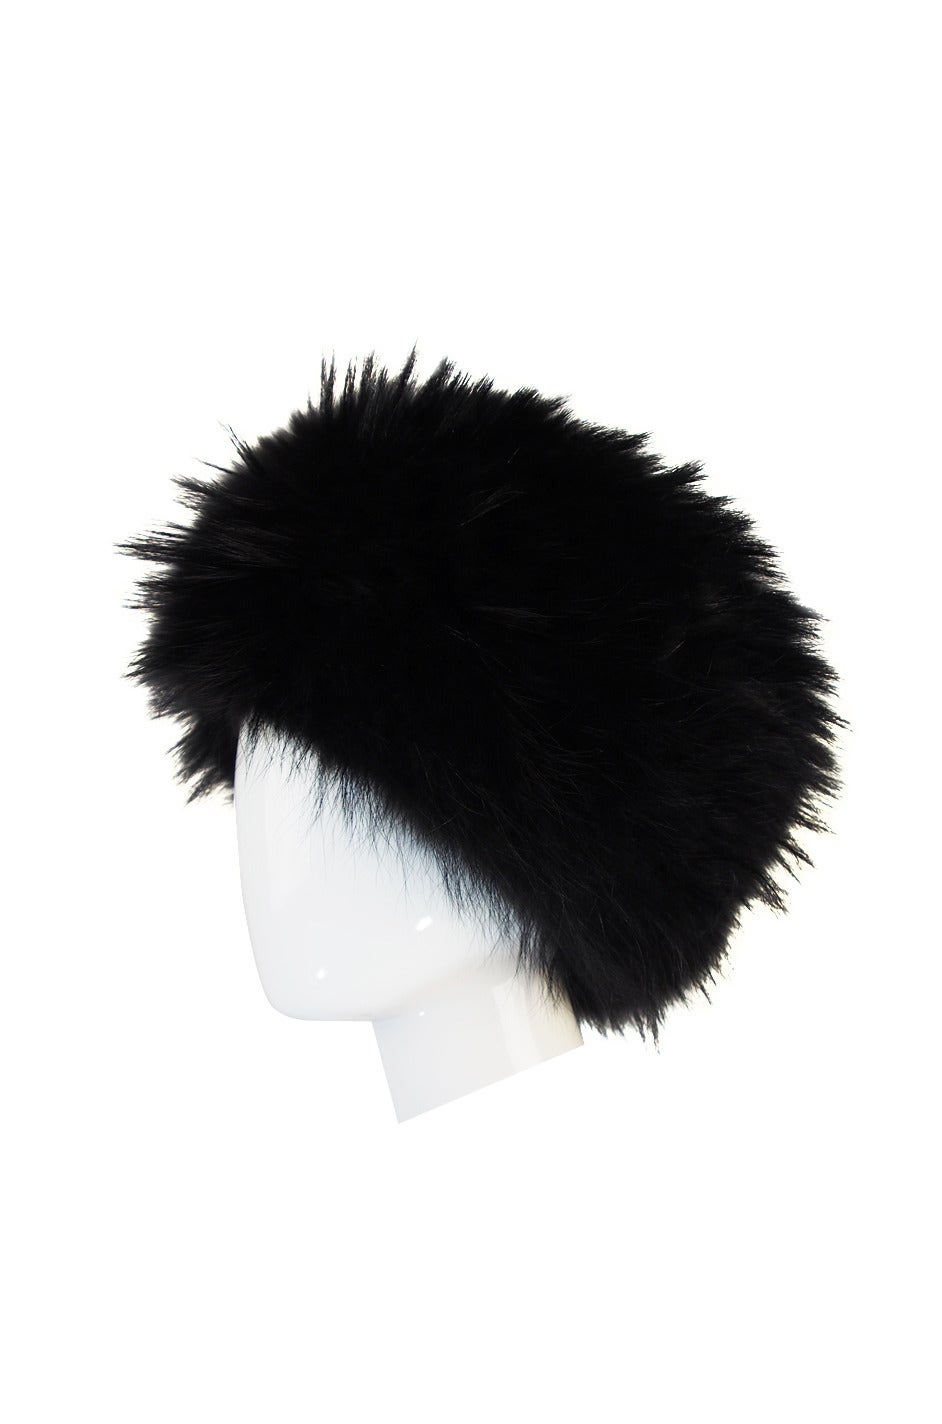 This hat is such a statement piece and so bold! Made of a glossy Marmot pelt that has two length of fur giving it that wonderful fullness. It looks to be unworn and because of the basic beanie style you can wear it numerous ways - to the side,